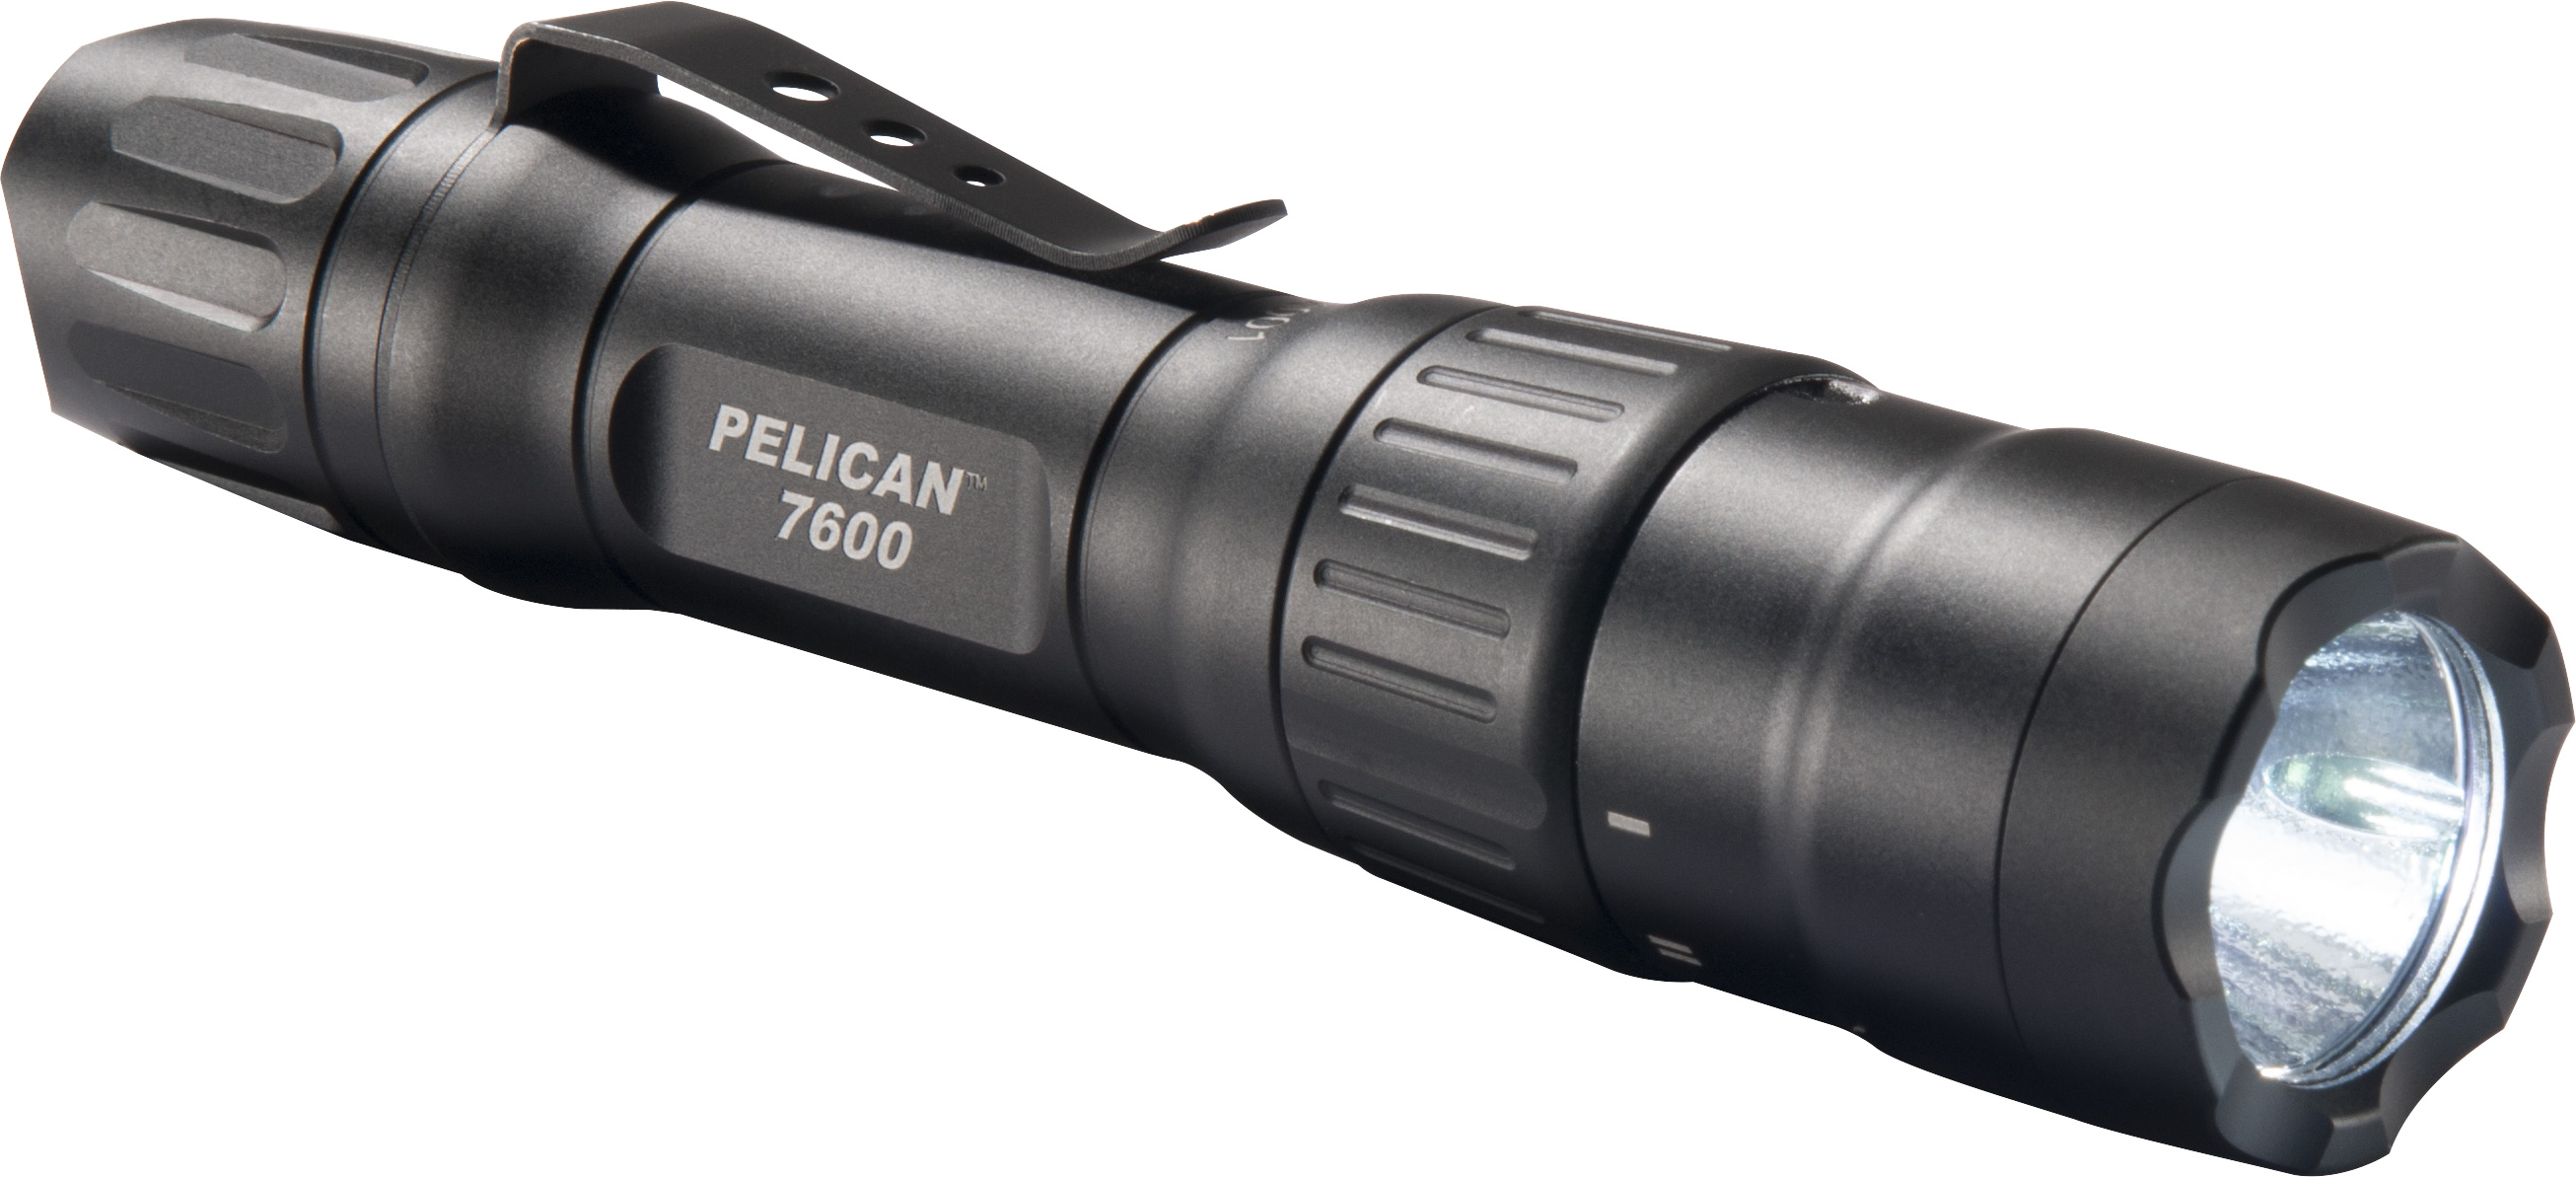 Pelican Self Programmable Rechargeable 944 lumen colored LED Flashlight  $3.03 Off Customer Rated w/ Free Shipping